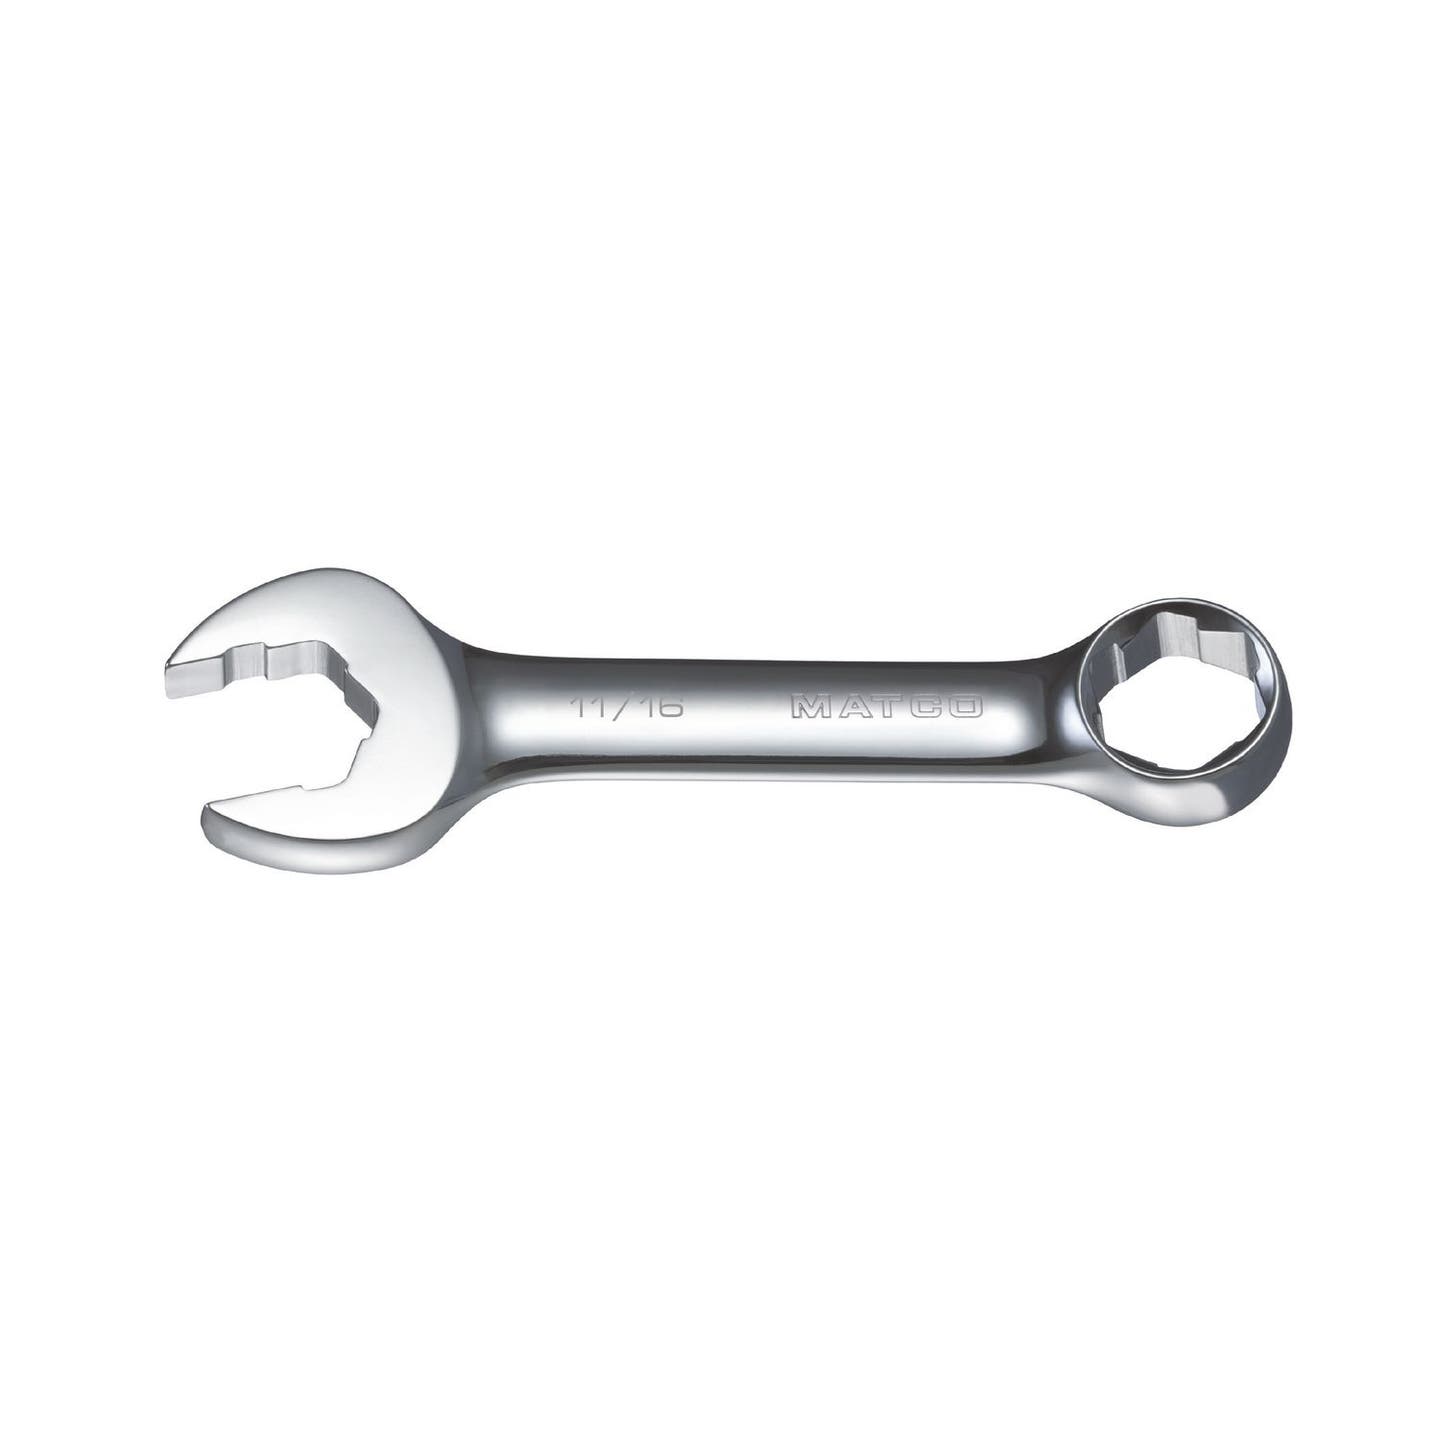 11/16" STUBBY SAE HEX GRIP WRENCH